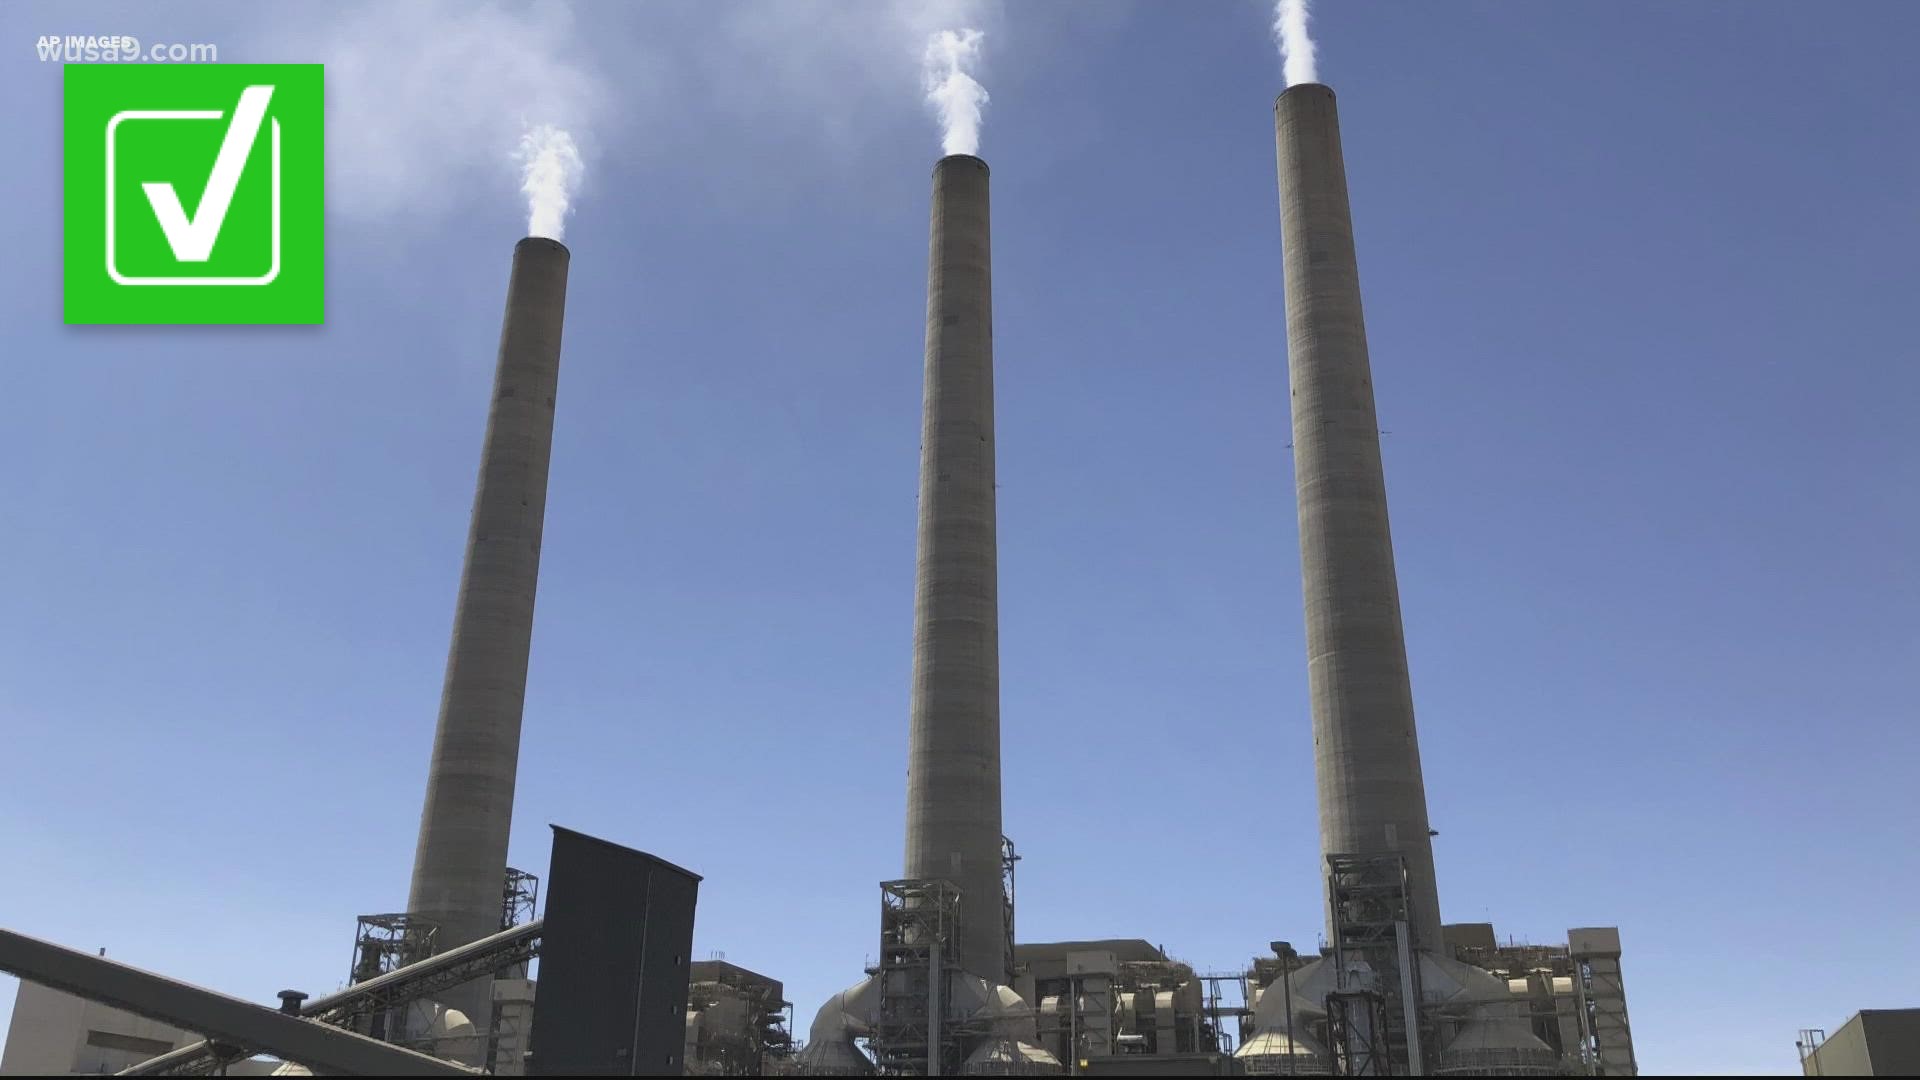 We asked the experts which has a larger impact on pollution: Coal, or natural gas.